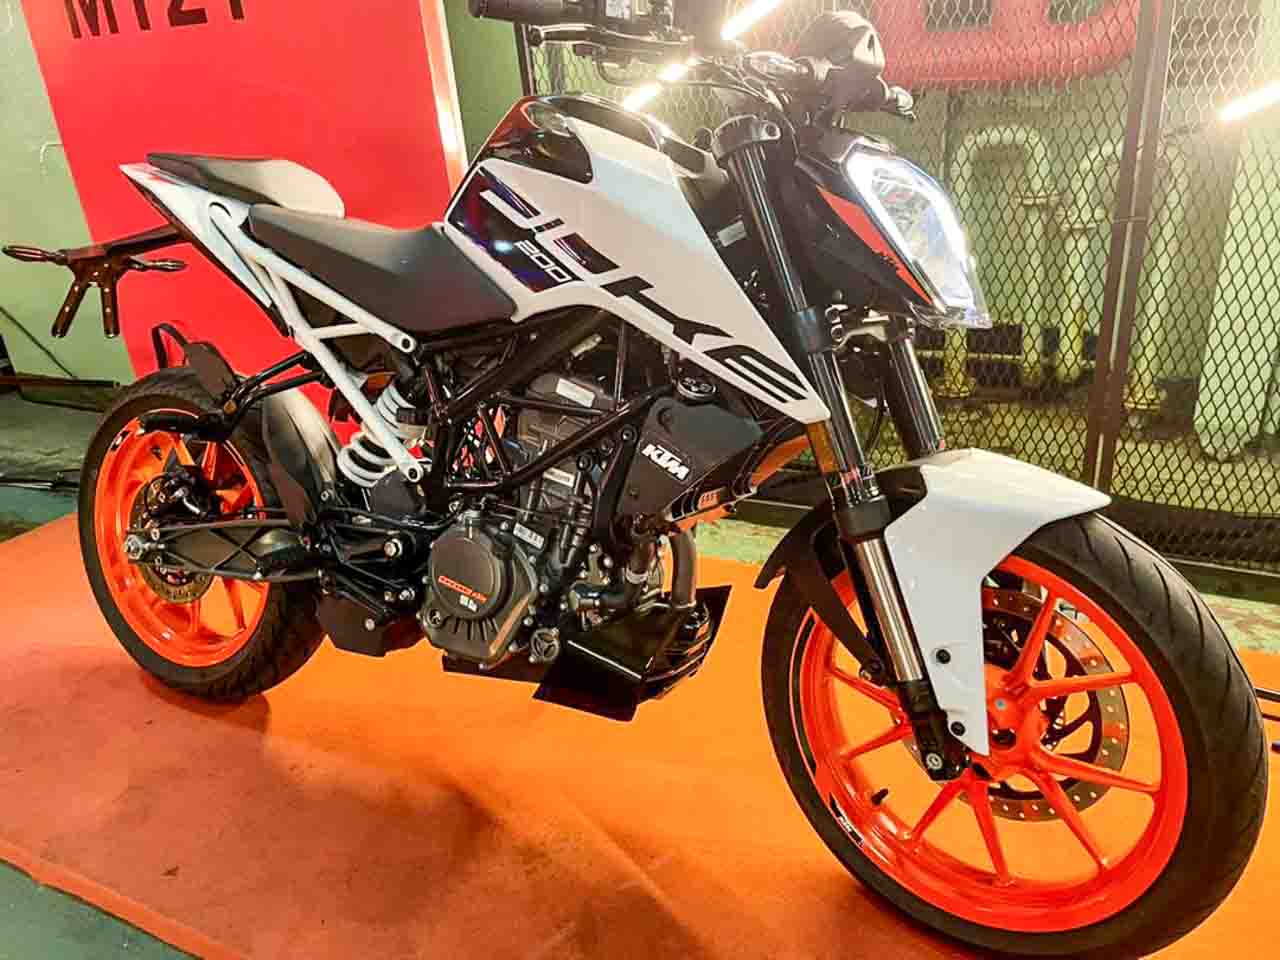 KTM Duke, RC, ADV And Husqvarna Prices Increased By Up To 10k